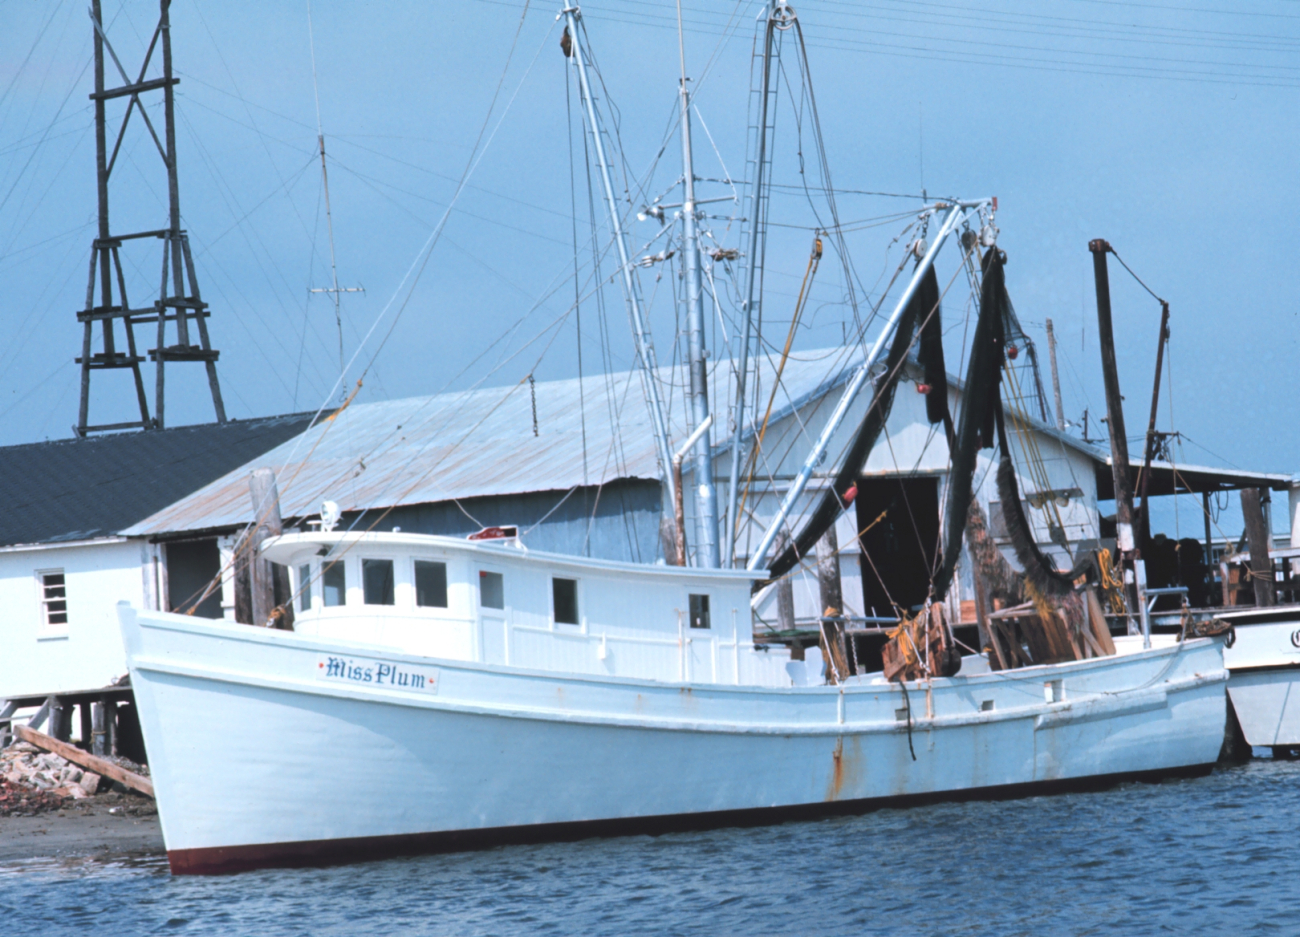 A shrimp boat at the pier